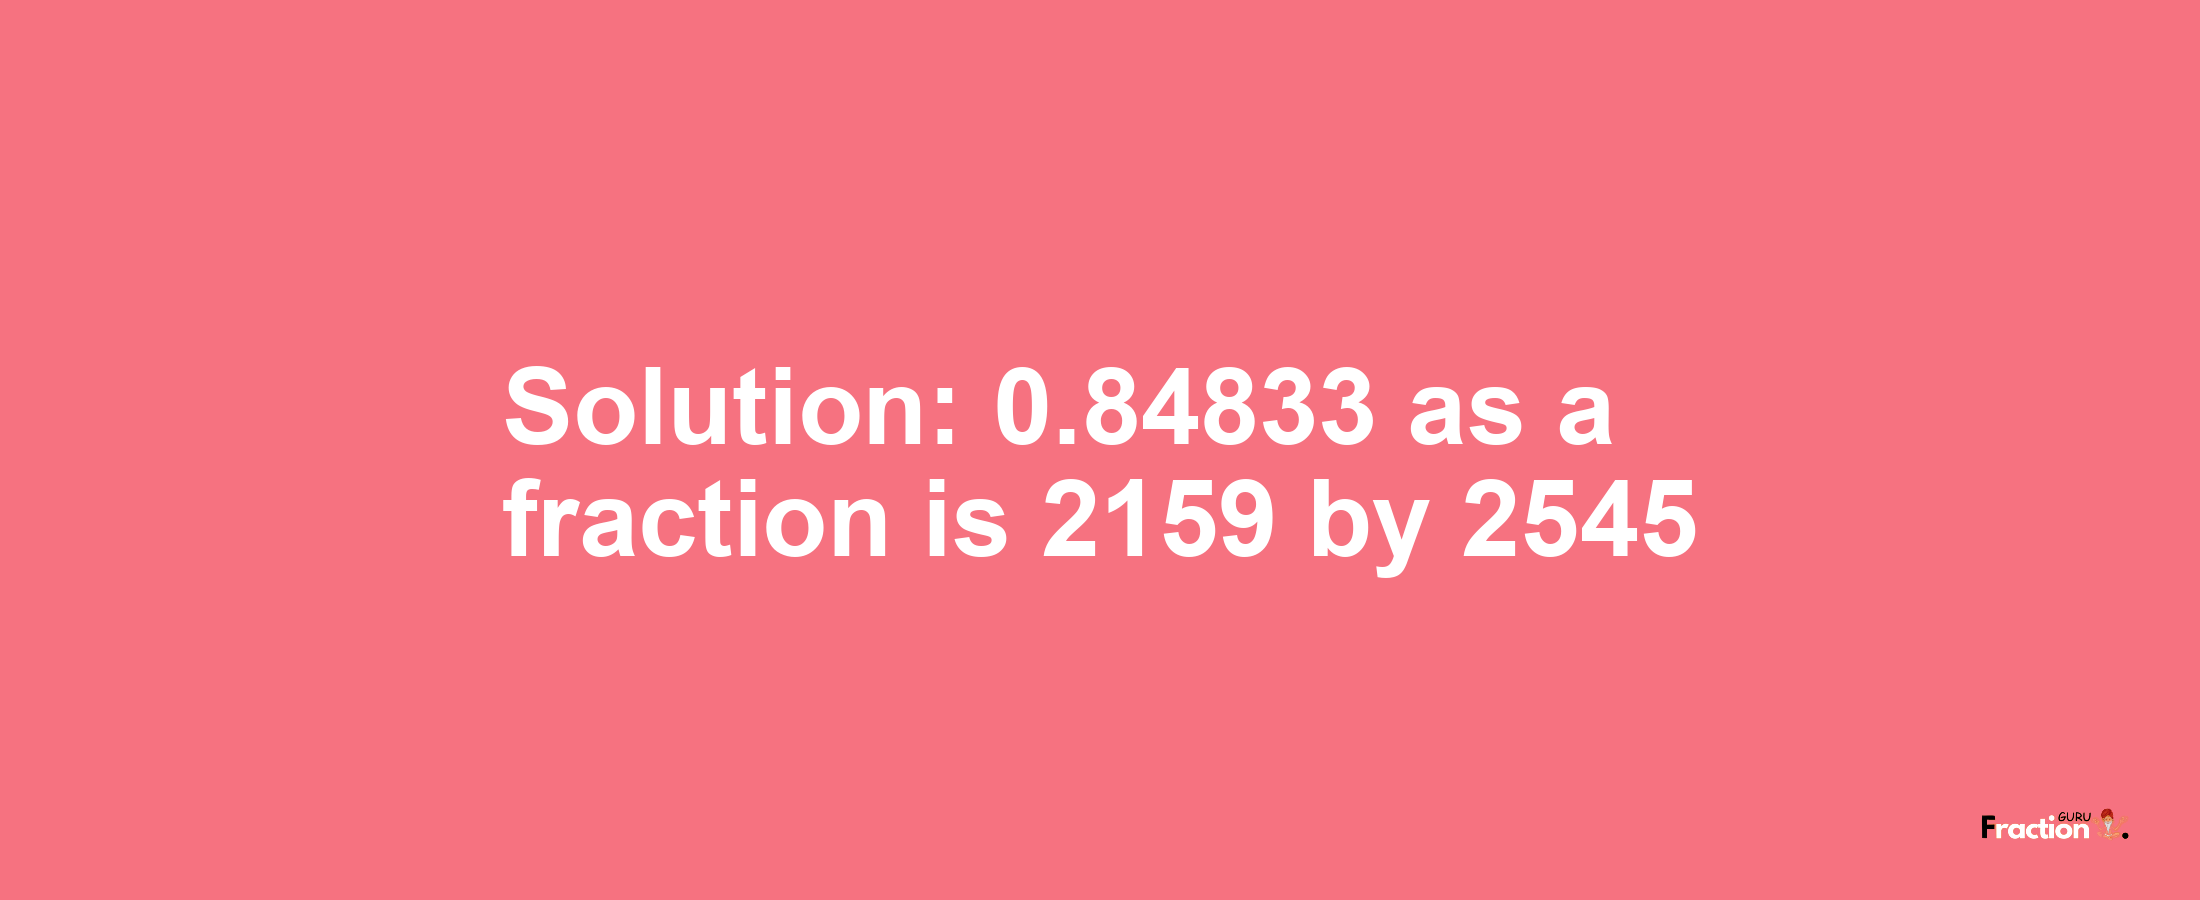 Solution:0.84833 as a fraction is 2159/2545